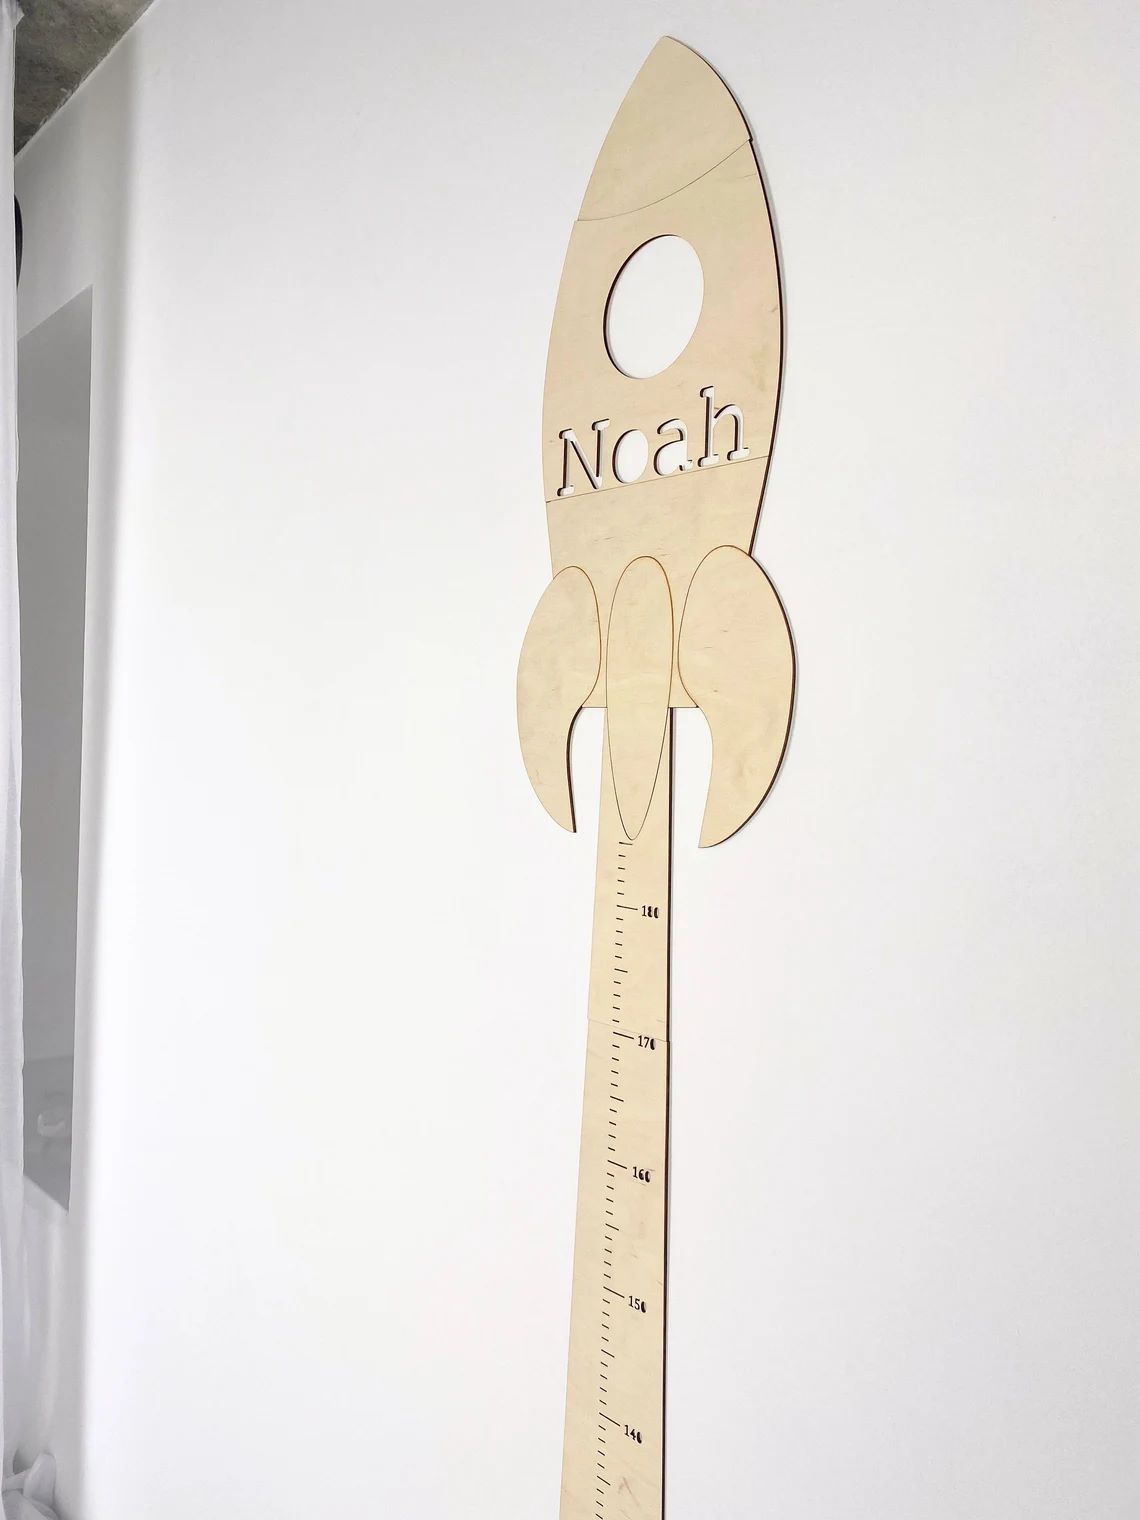 Personalized Wooden Baby Rocket Plank Growth Chart